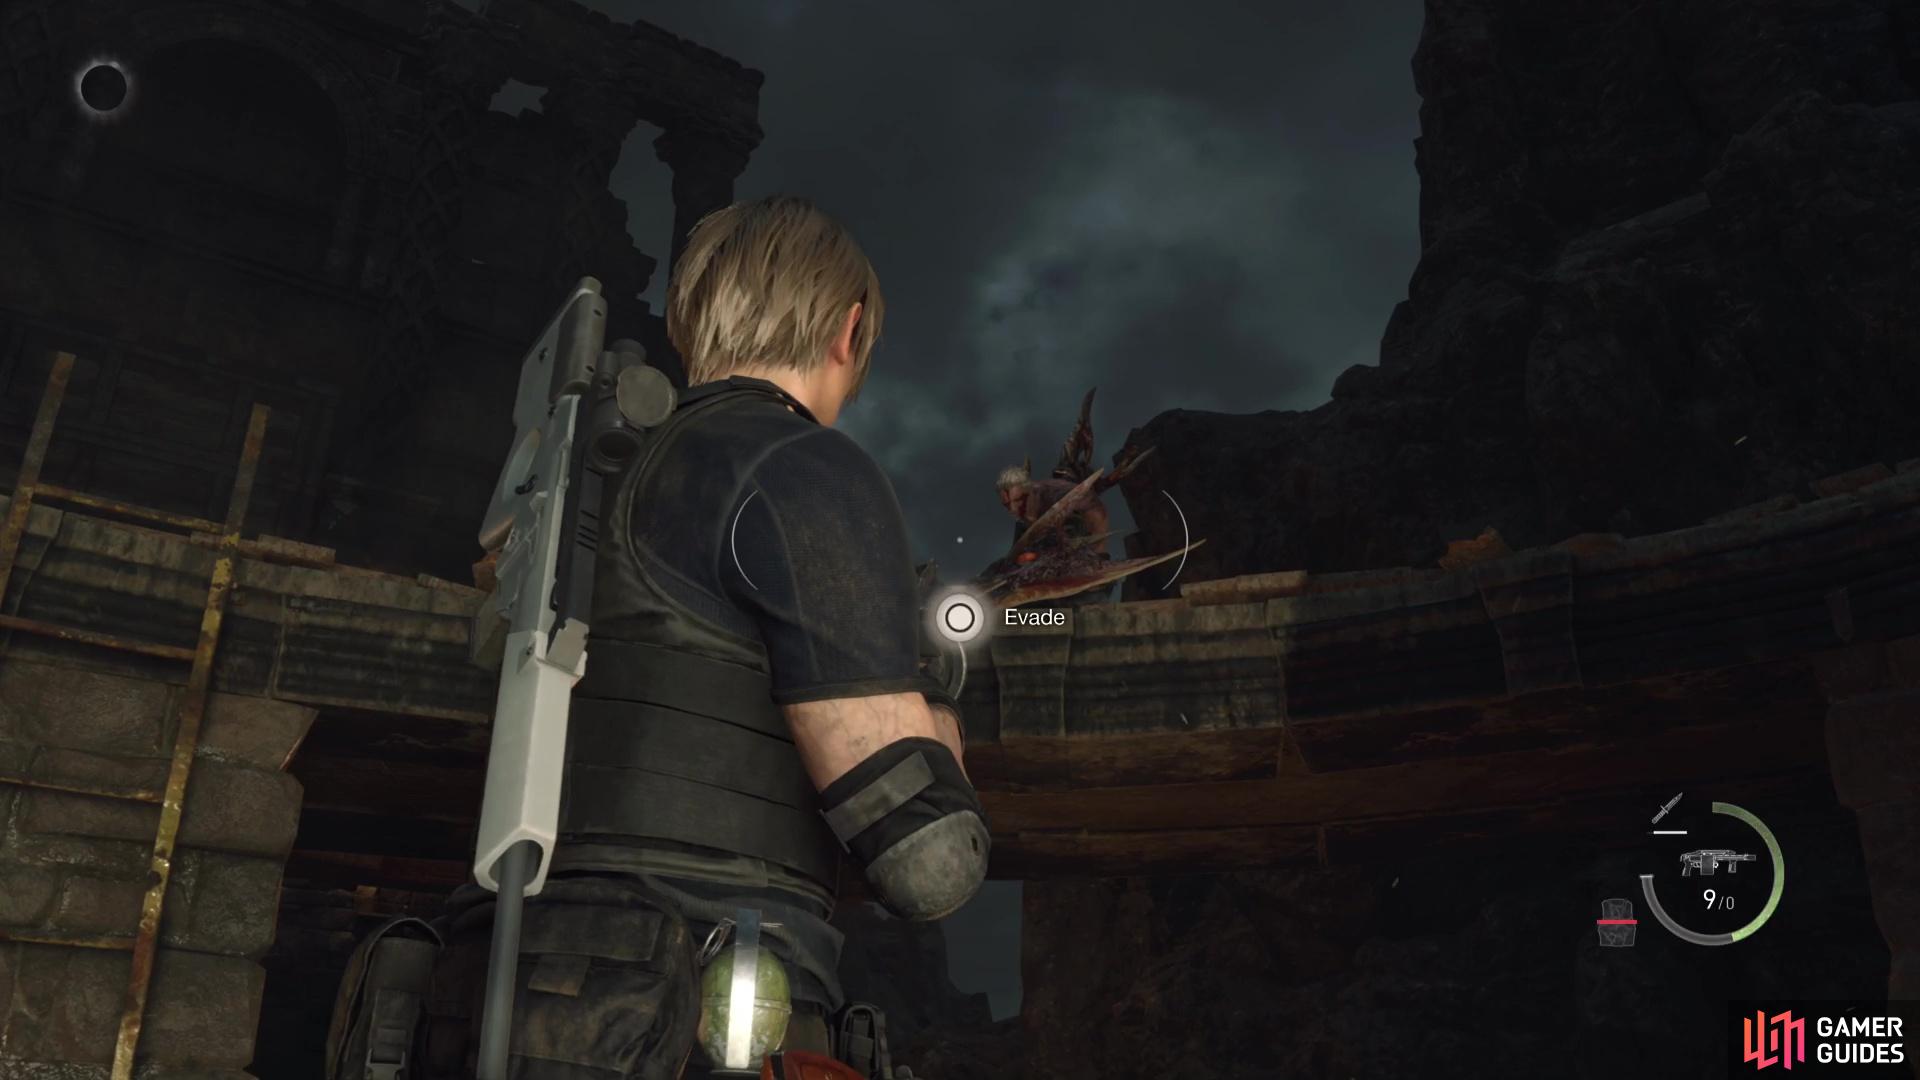 How to beat the Krauser boss in the Resident Evil 4 remake